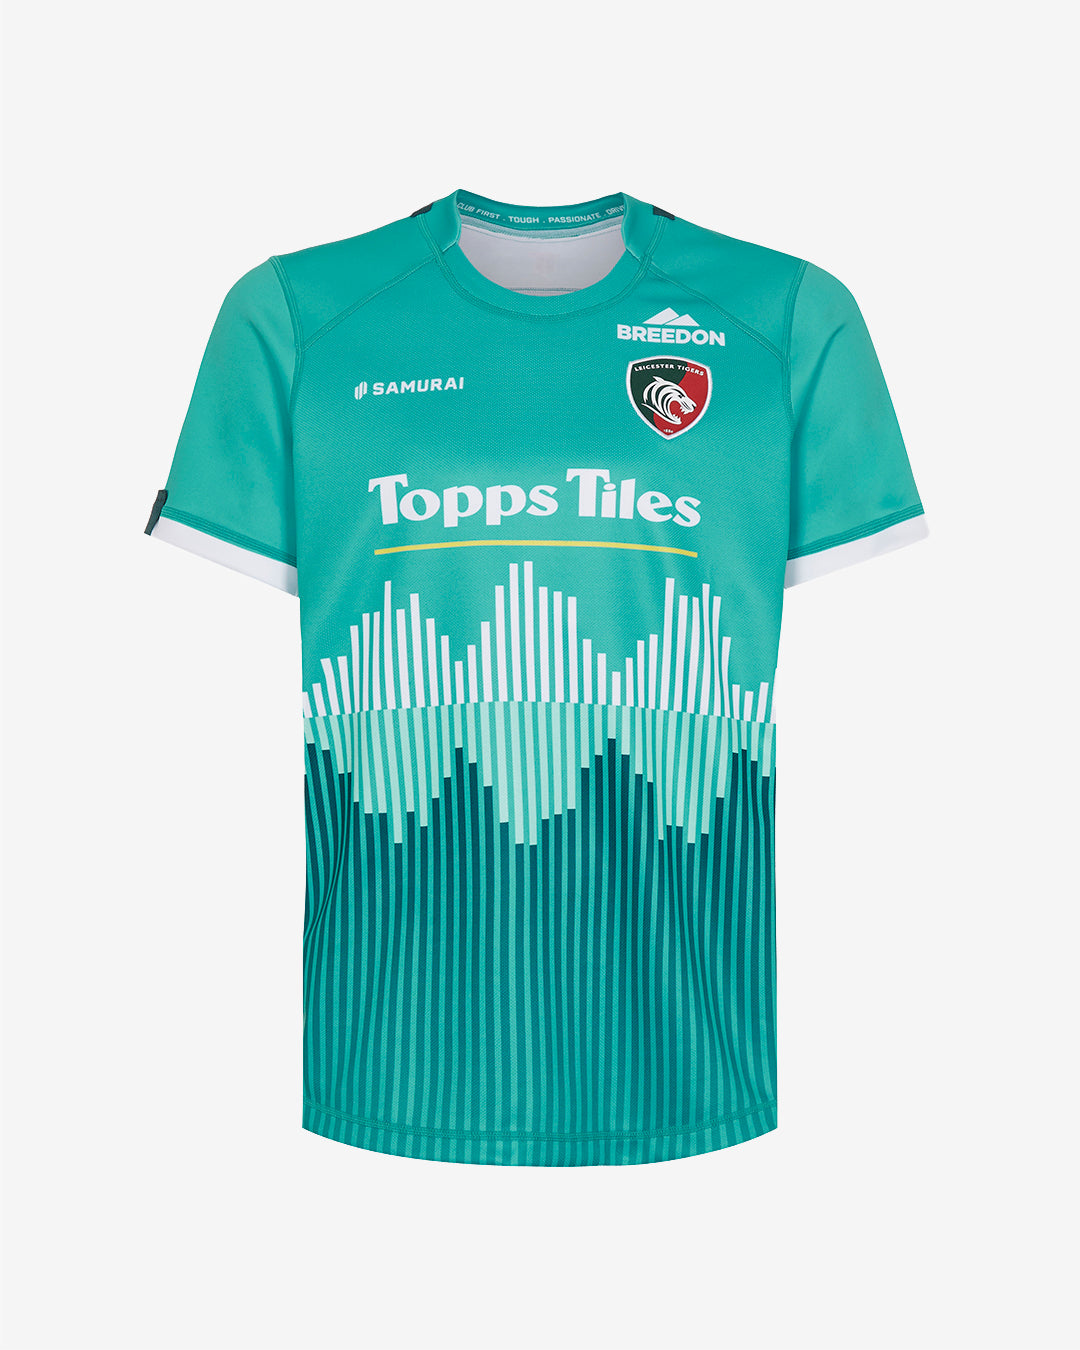 Official Leicester Tigers Club Shop - Replica Kit